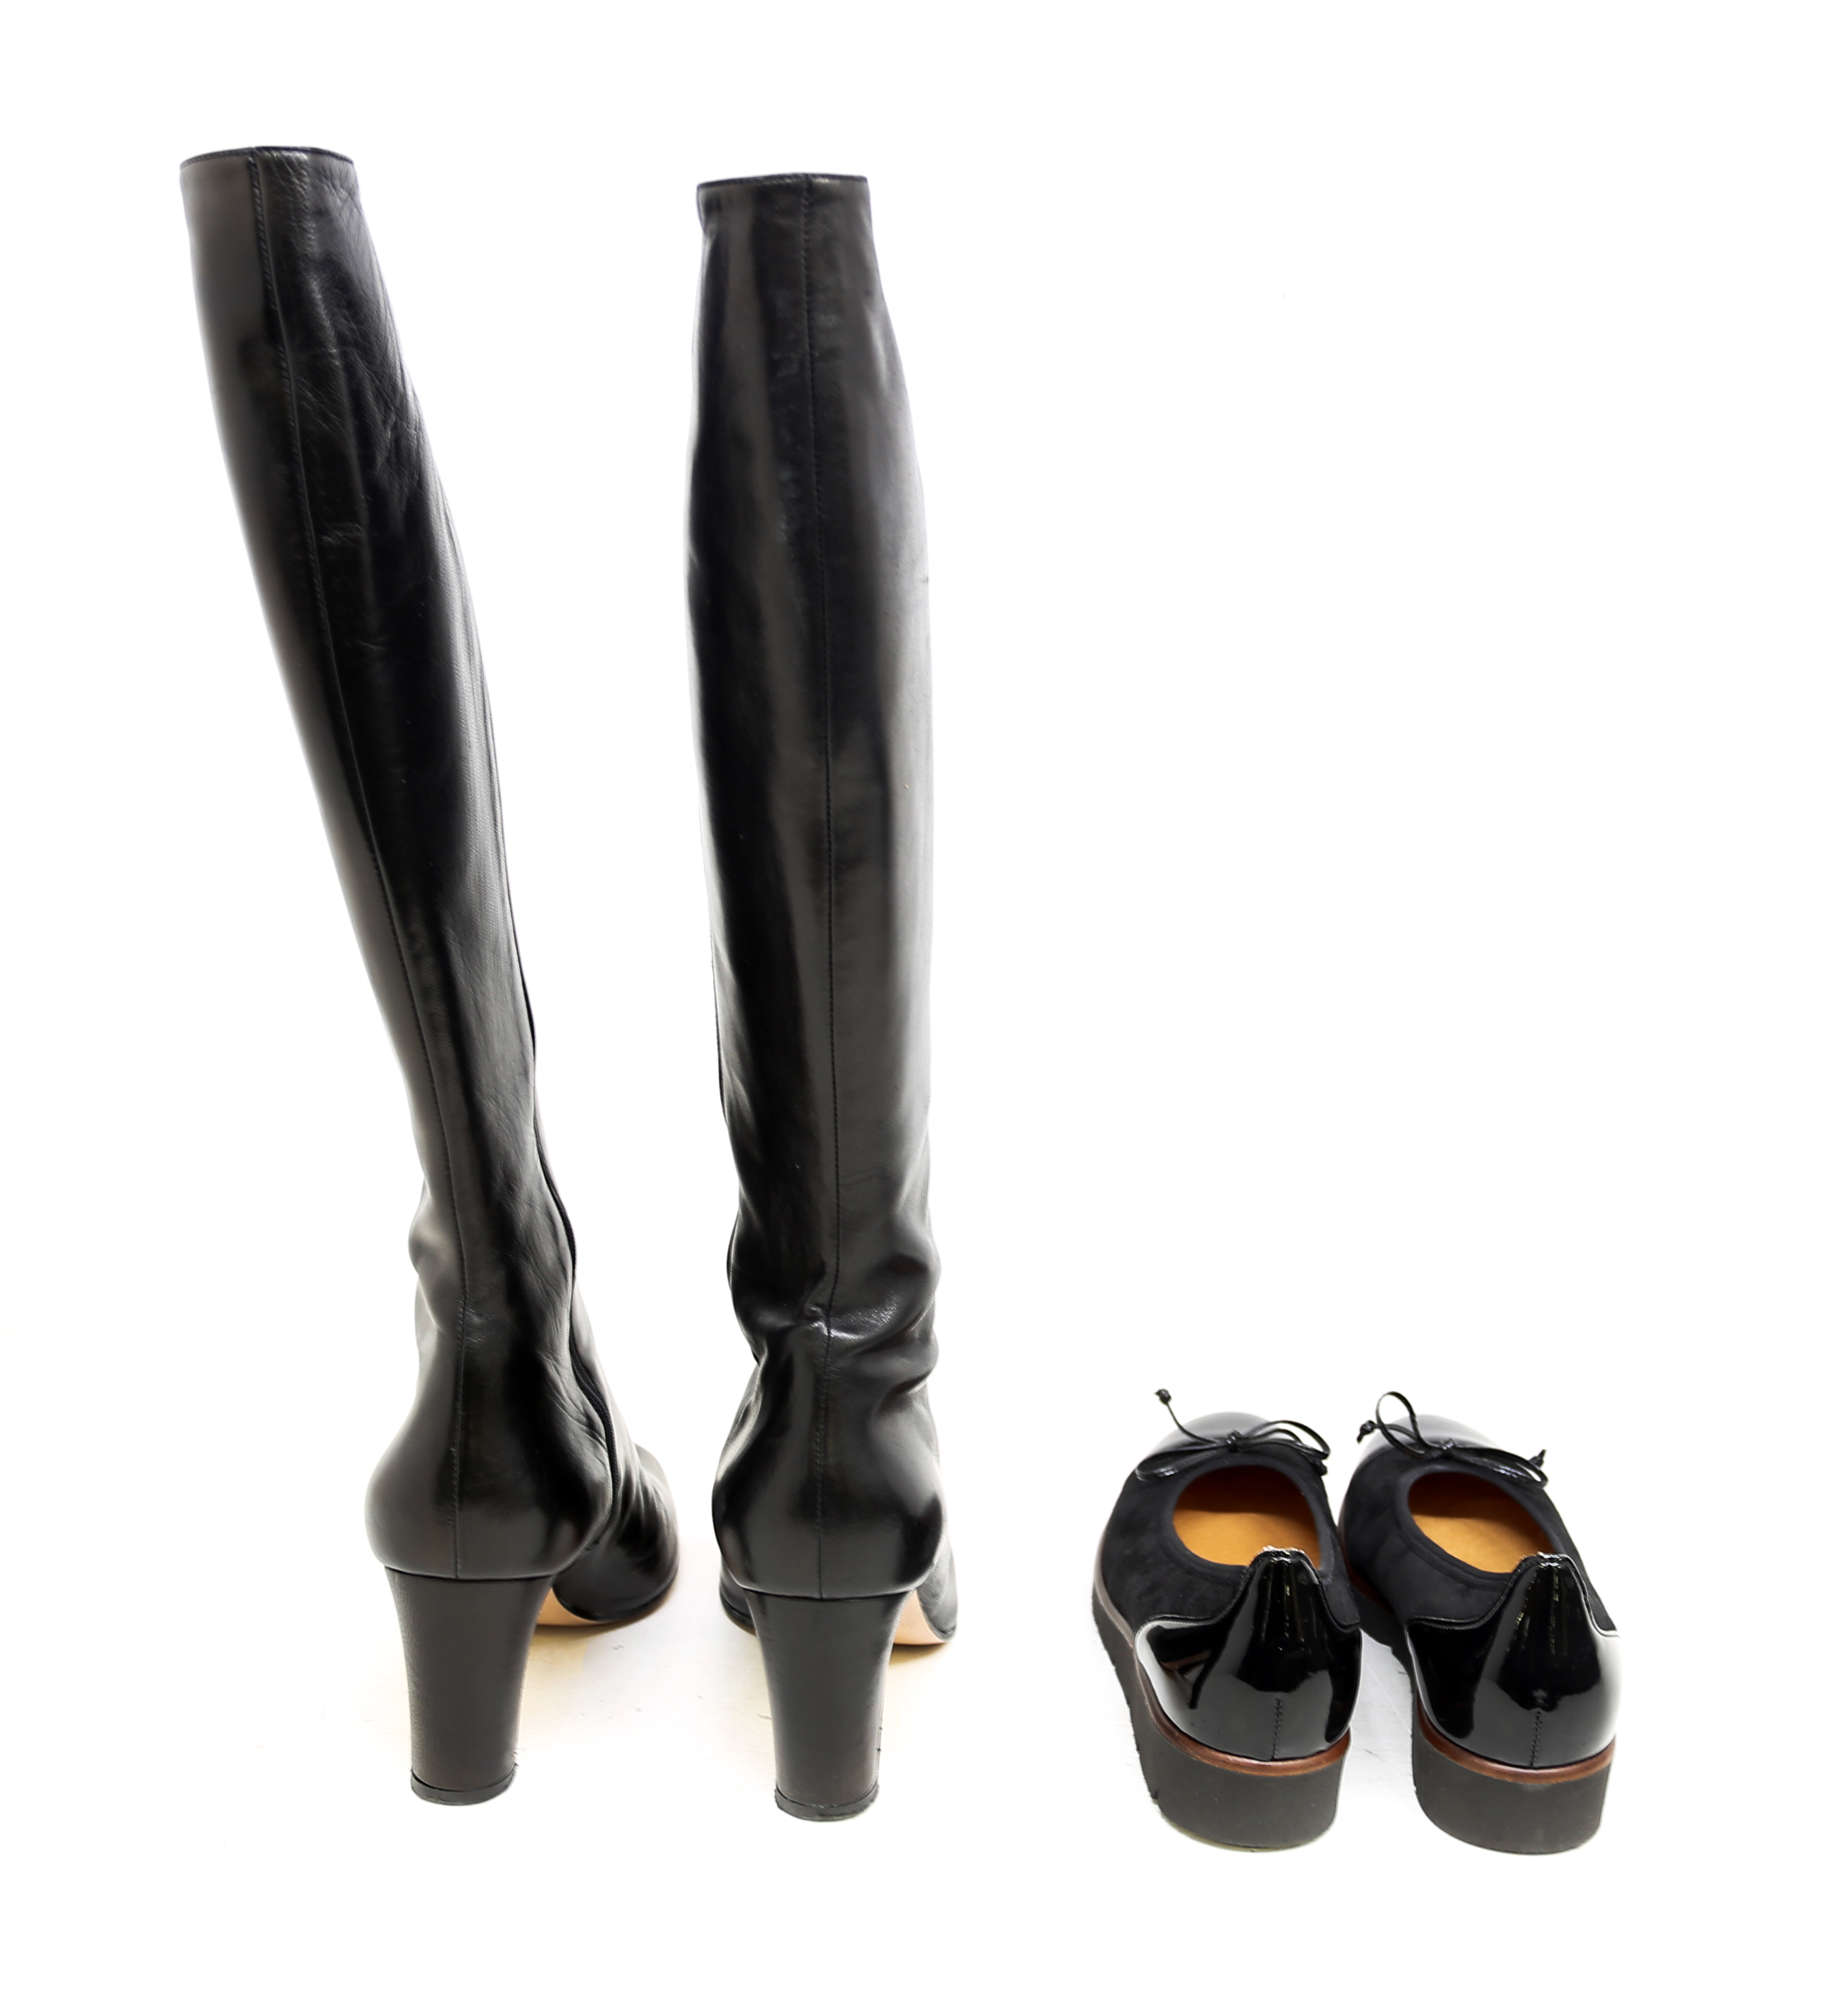 A pair of Hobbs black leather knee-high boots with a long zip, 3" heel, pleated leather detail on - Image 3 of 4